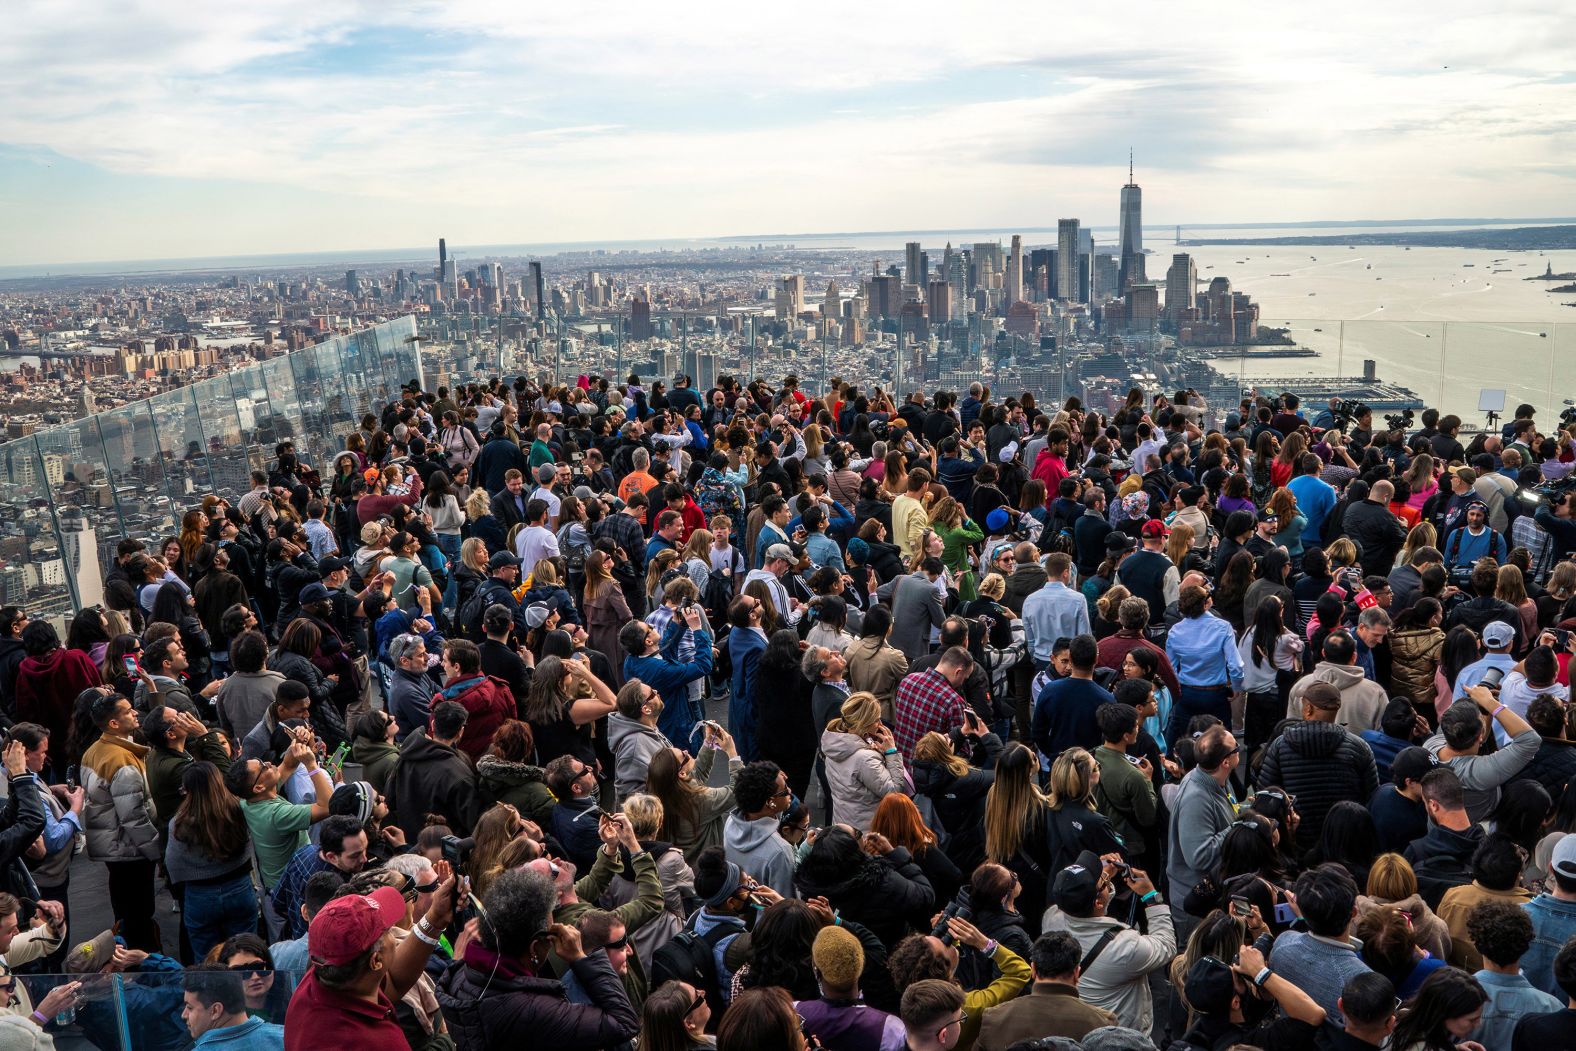 People watch the eclipse from the Edge observation deck at Hudson Yards in New York City.